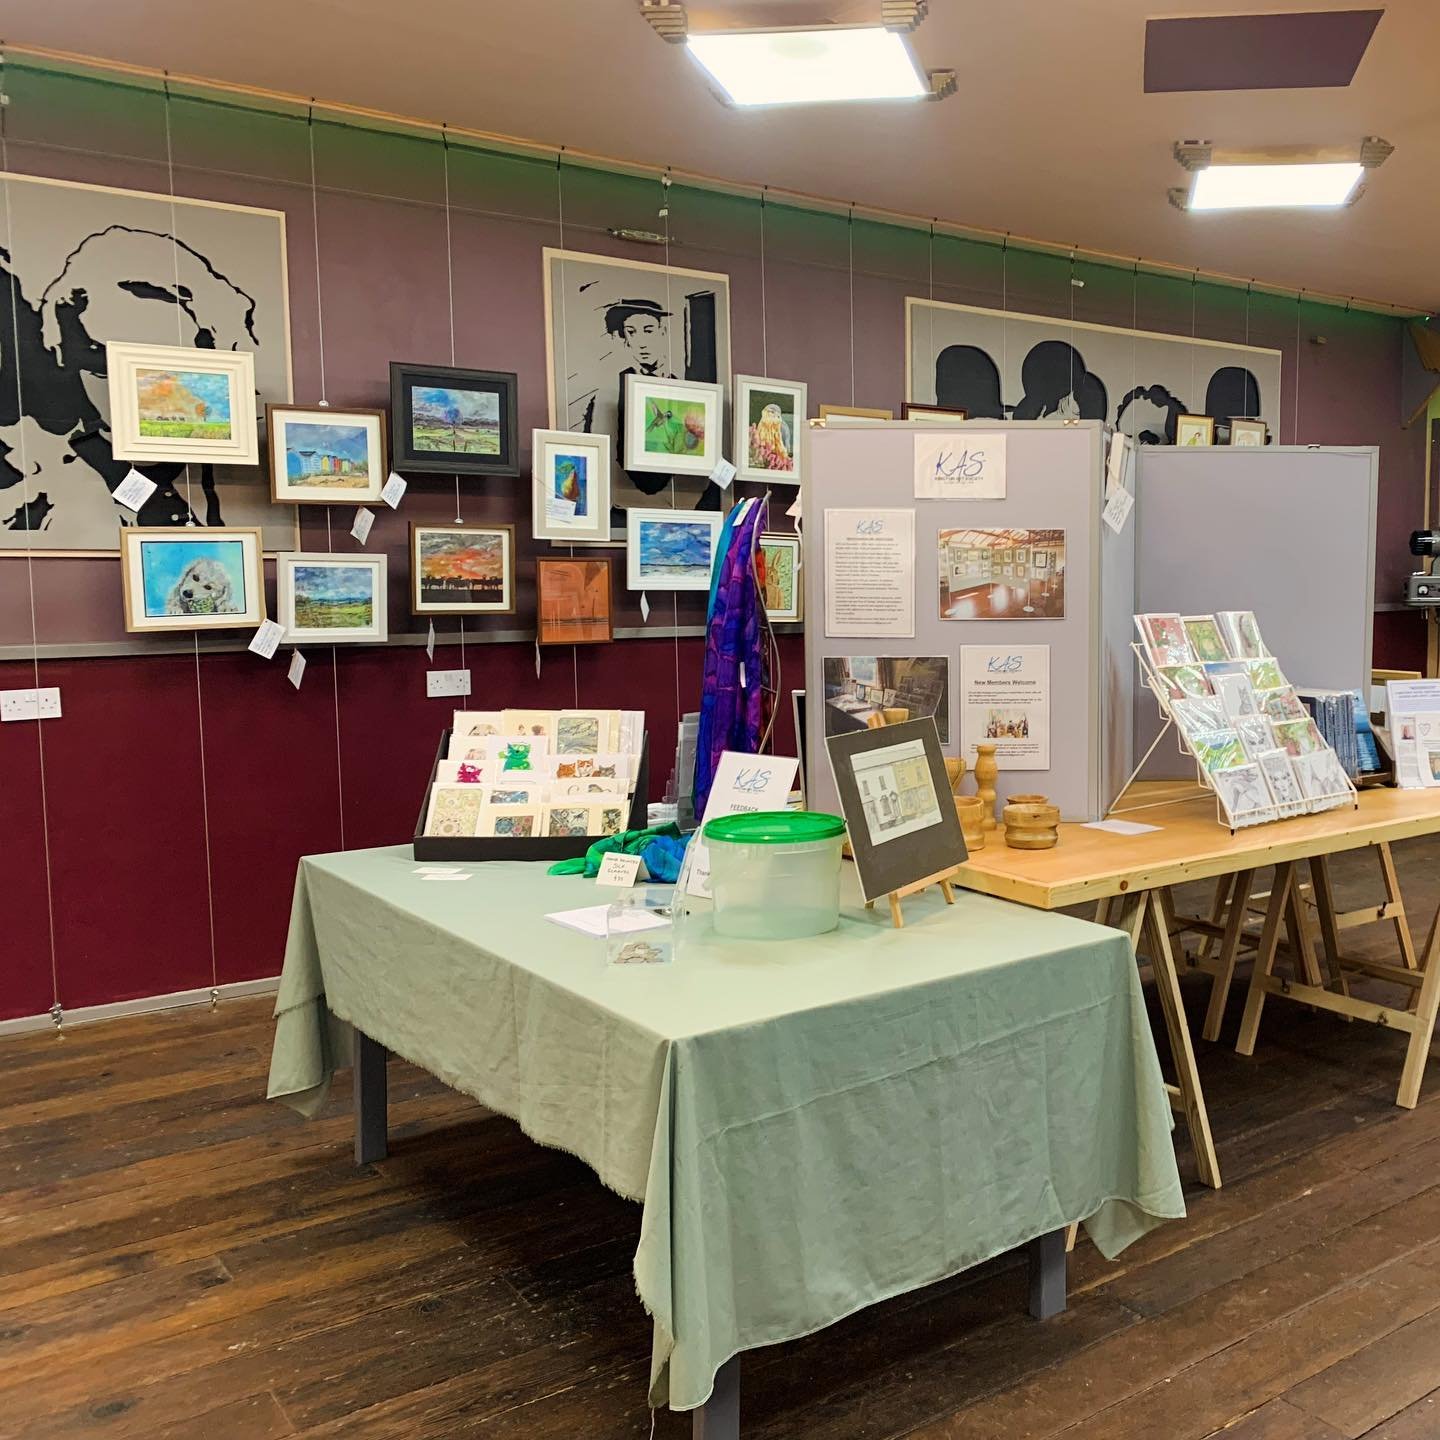 We&rsquo;re ready to go! See you this weekend for the Kington Art Society exhibition for the Marches Makers Festival 2024!

#theoldpicturehouse #theoldpicturehousekington #hart #herefordshireart #kington #kingtonherefordshire #rural #welovekington #s